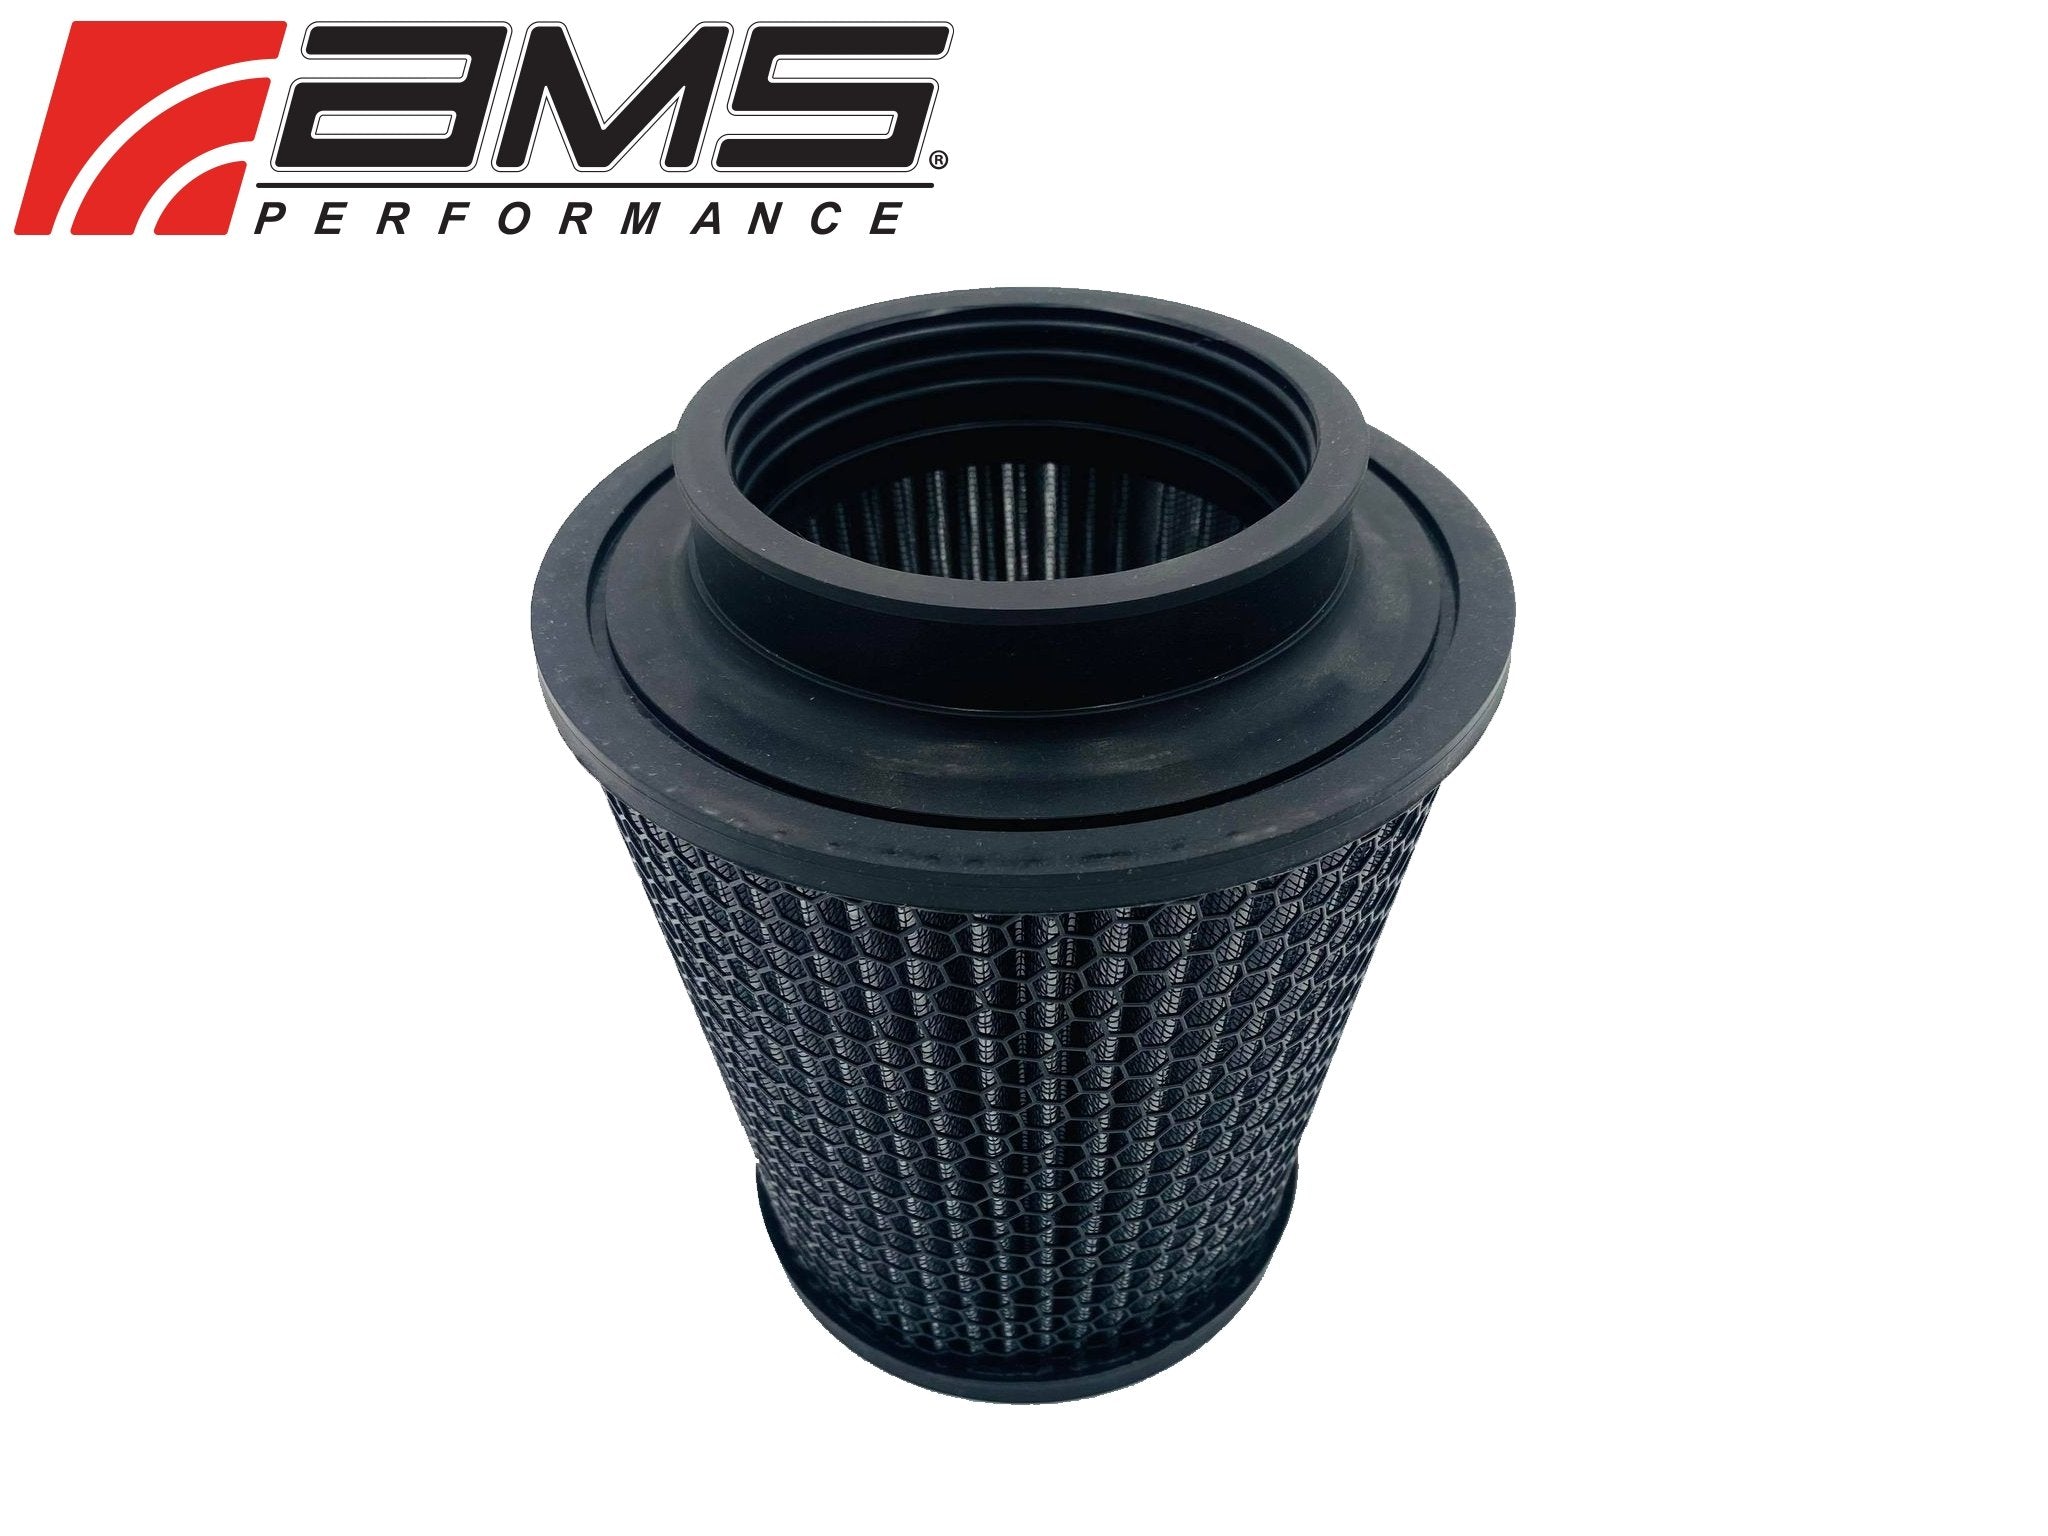 AMS Performance Replacement Air Filter for VW/Audi Intake System - Equilibrium Tuning, Inc.